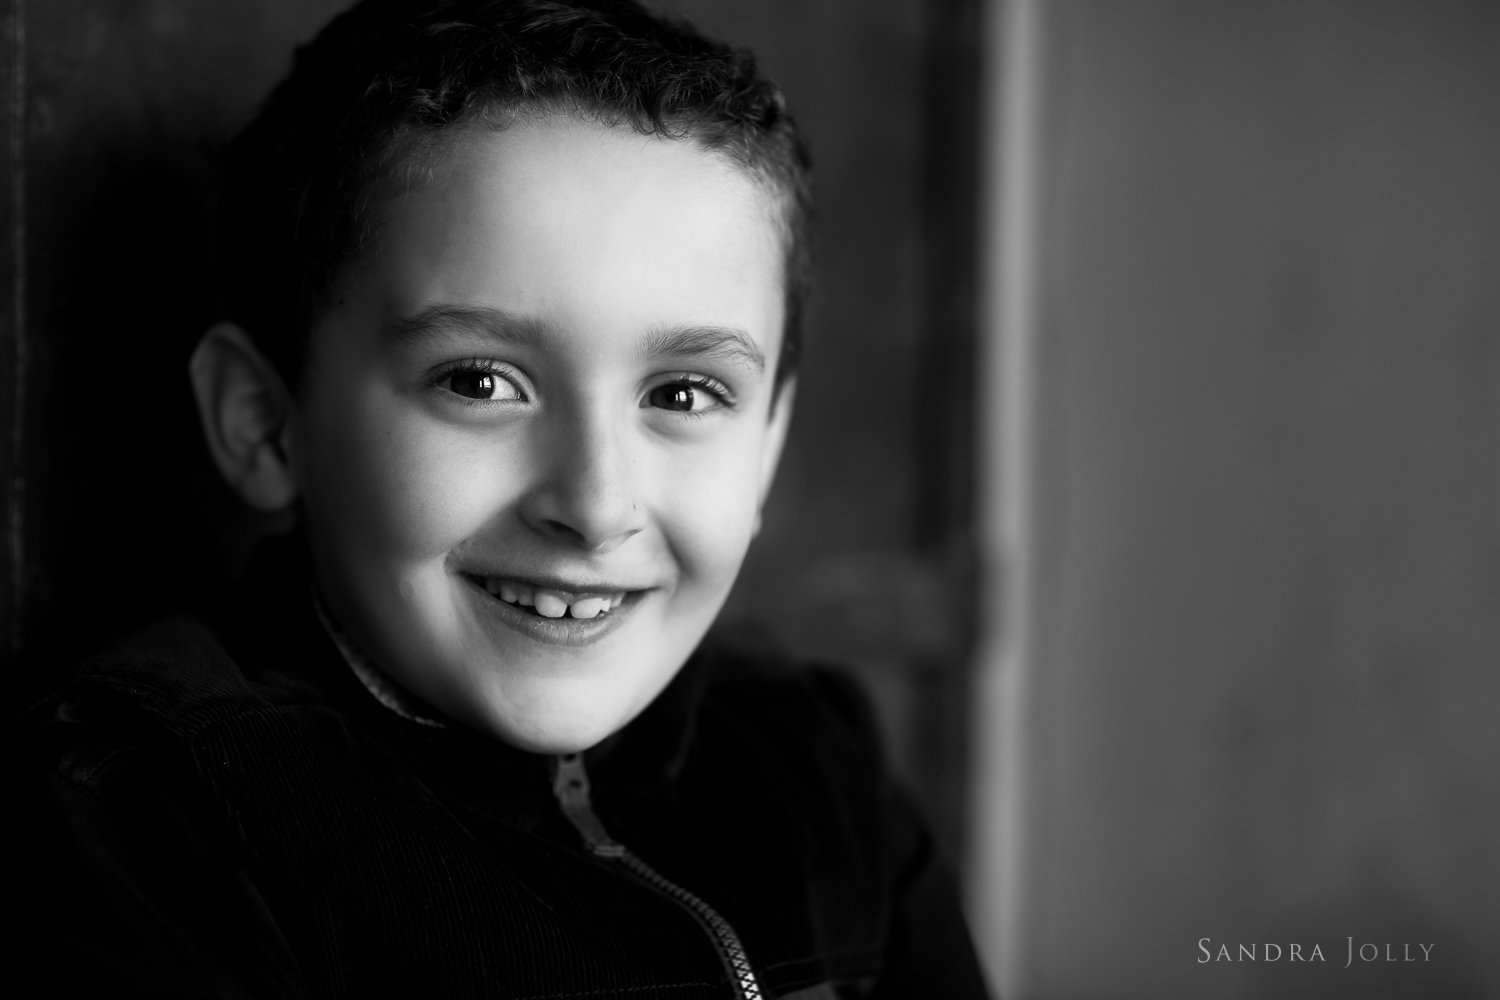 portrait-of-young-boy-by-sandra-jolly-photography.jpg